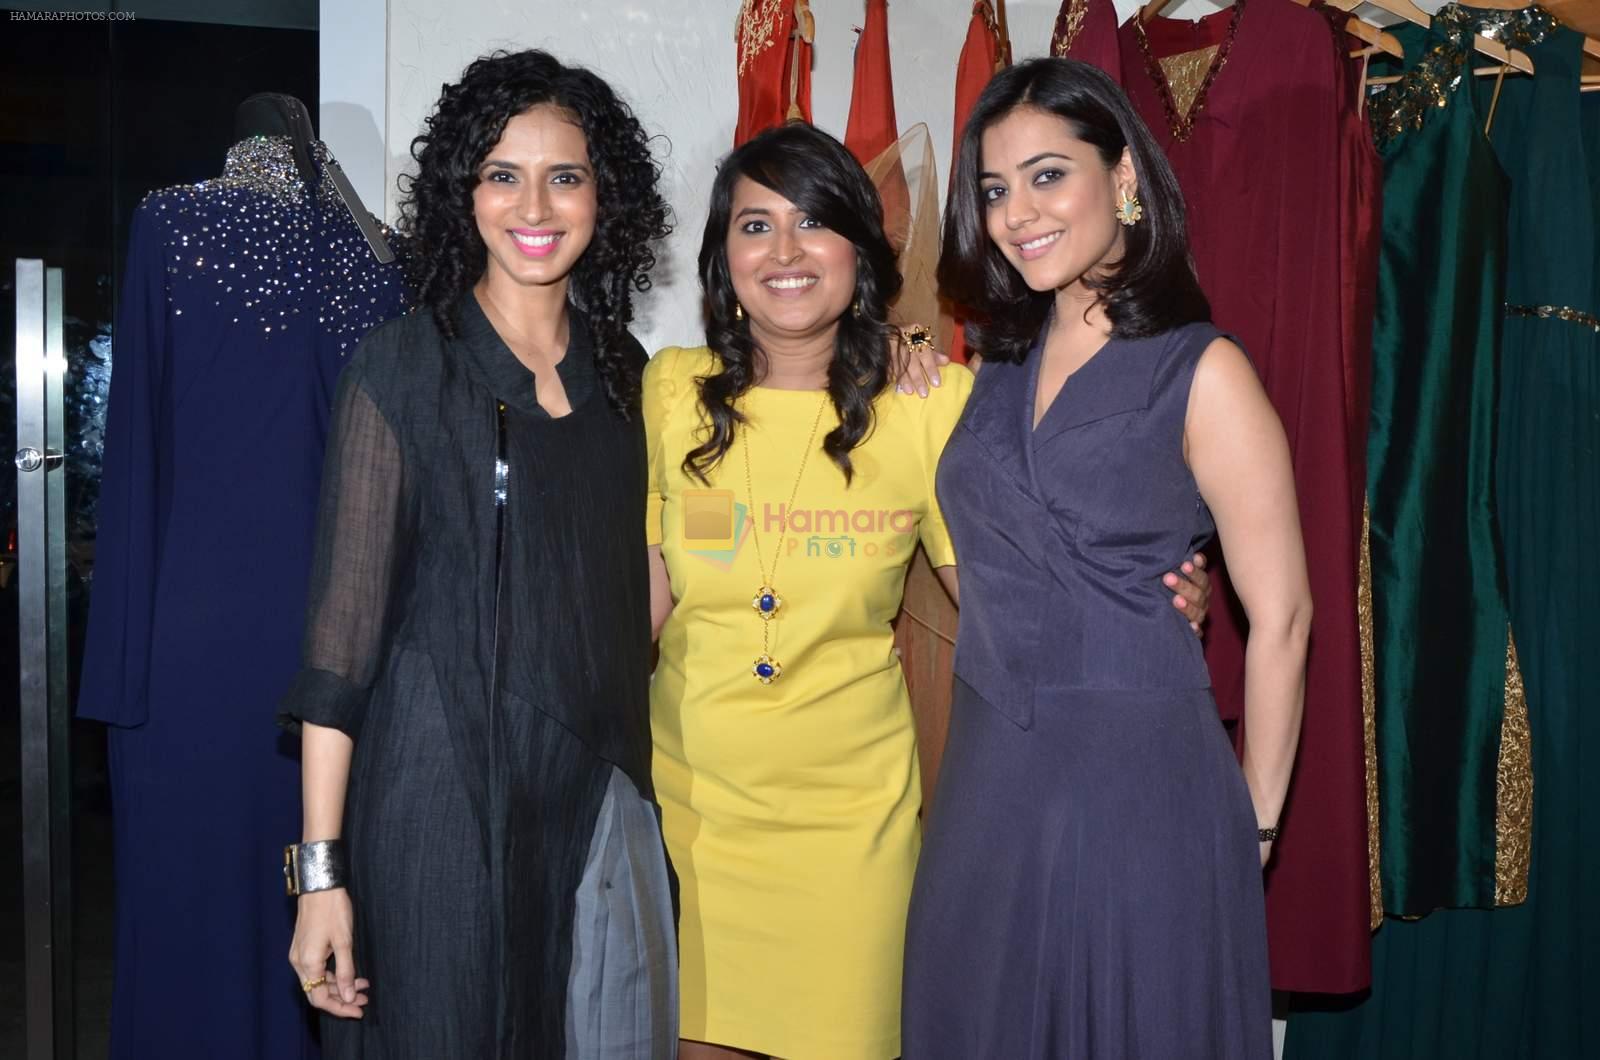 at Atosa launches new collection on 2nd Dec 2015